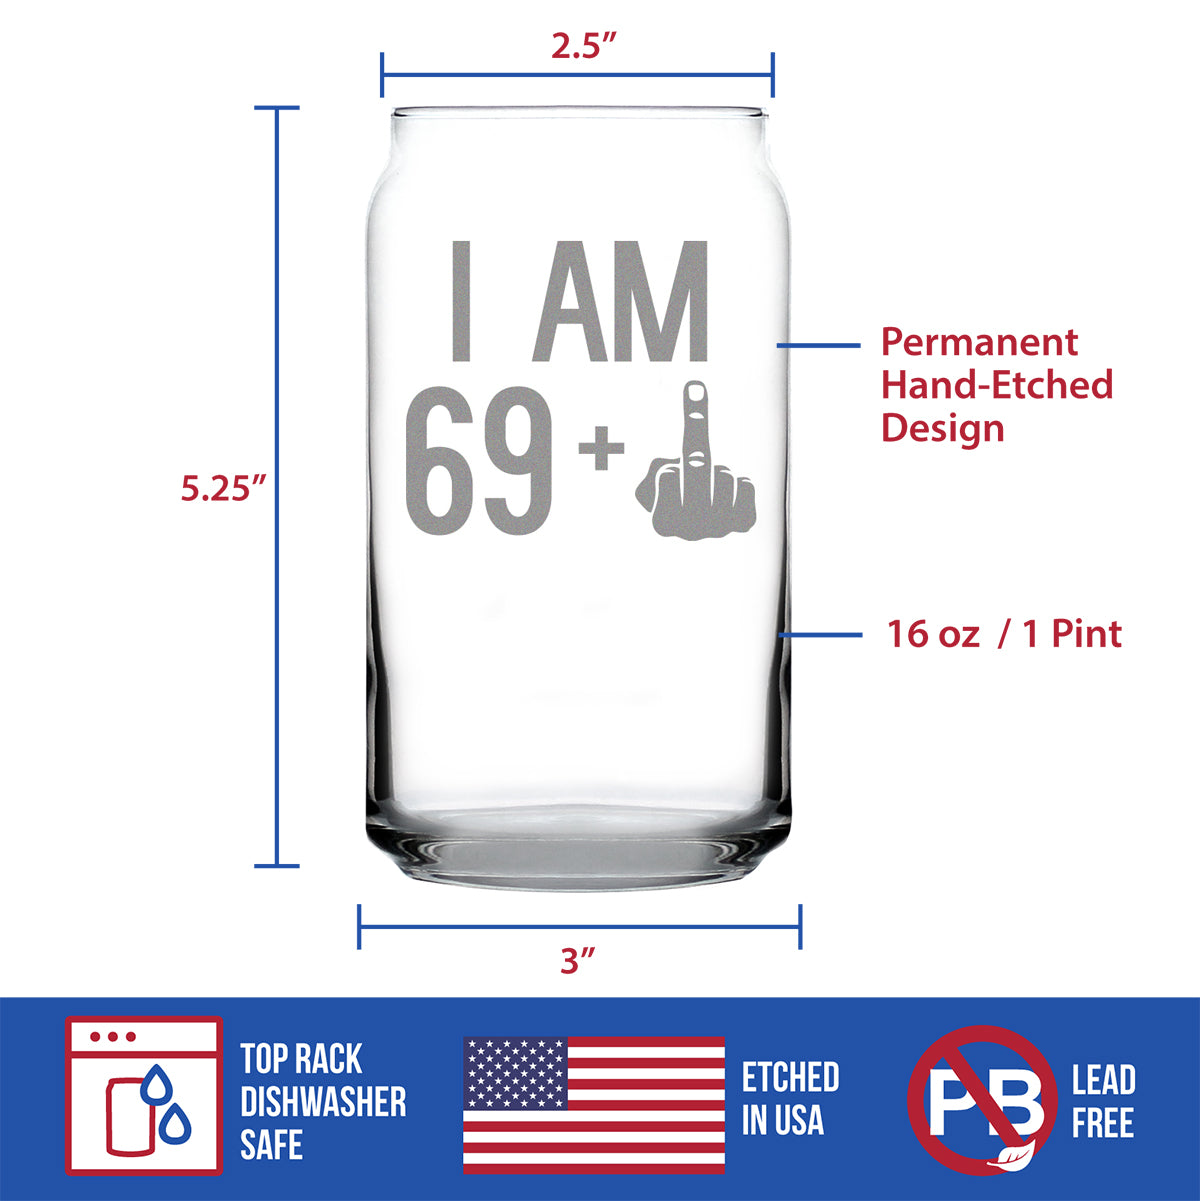 69 + 1 Middle Finger - 16 Ounce Beer Can Pint Glass